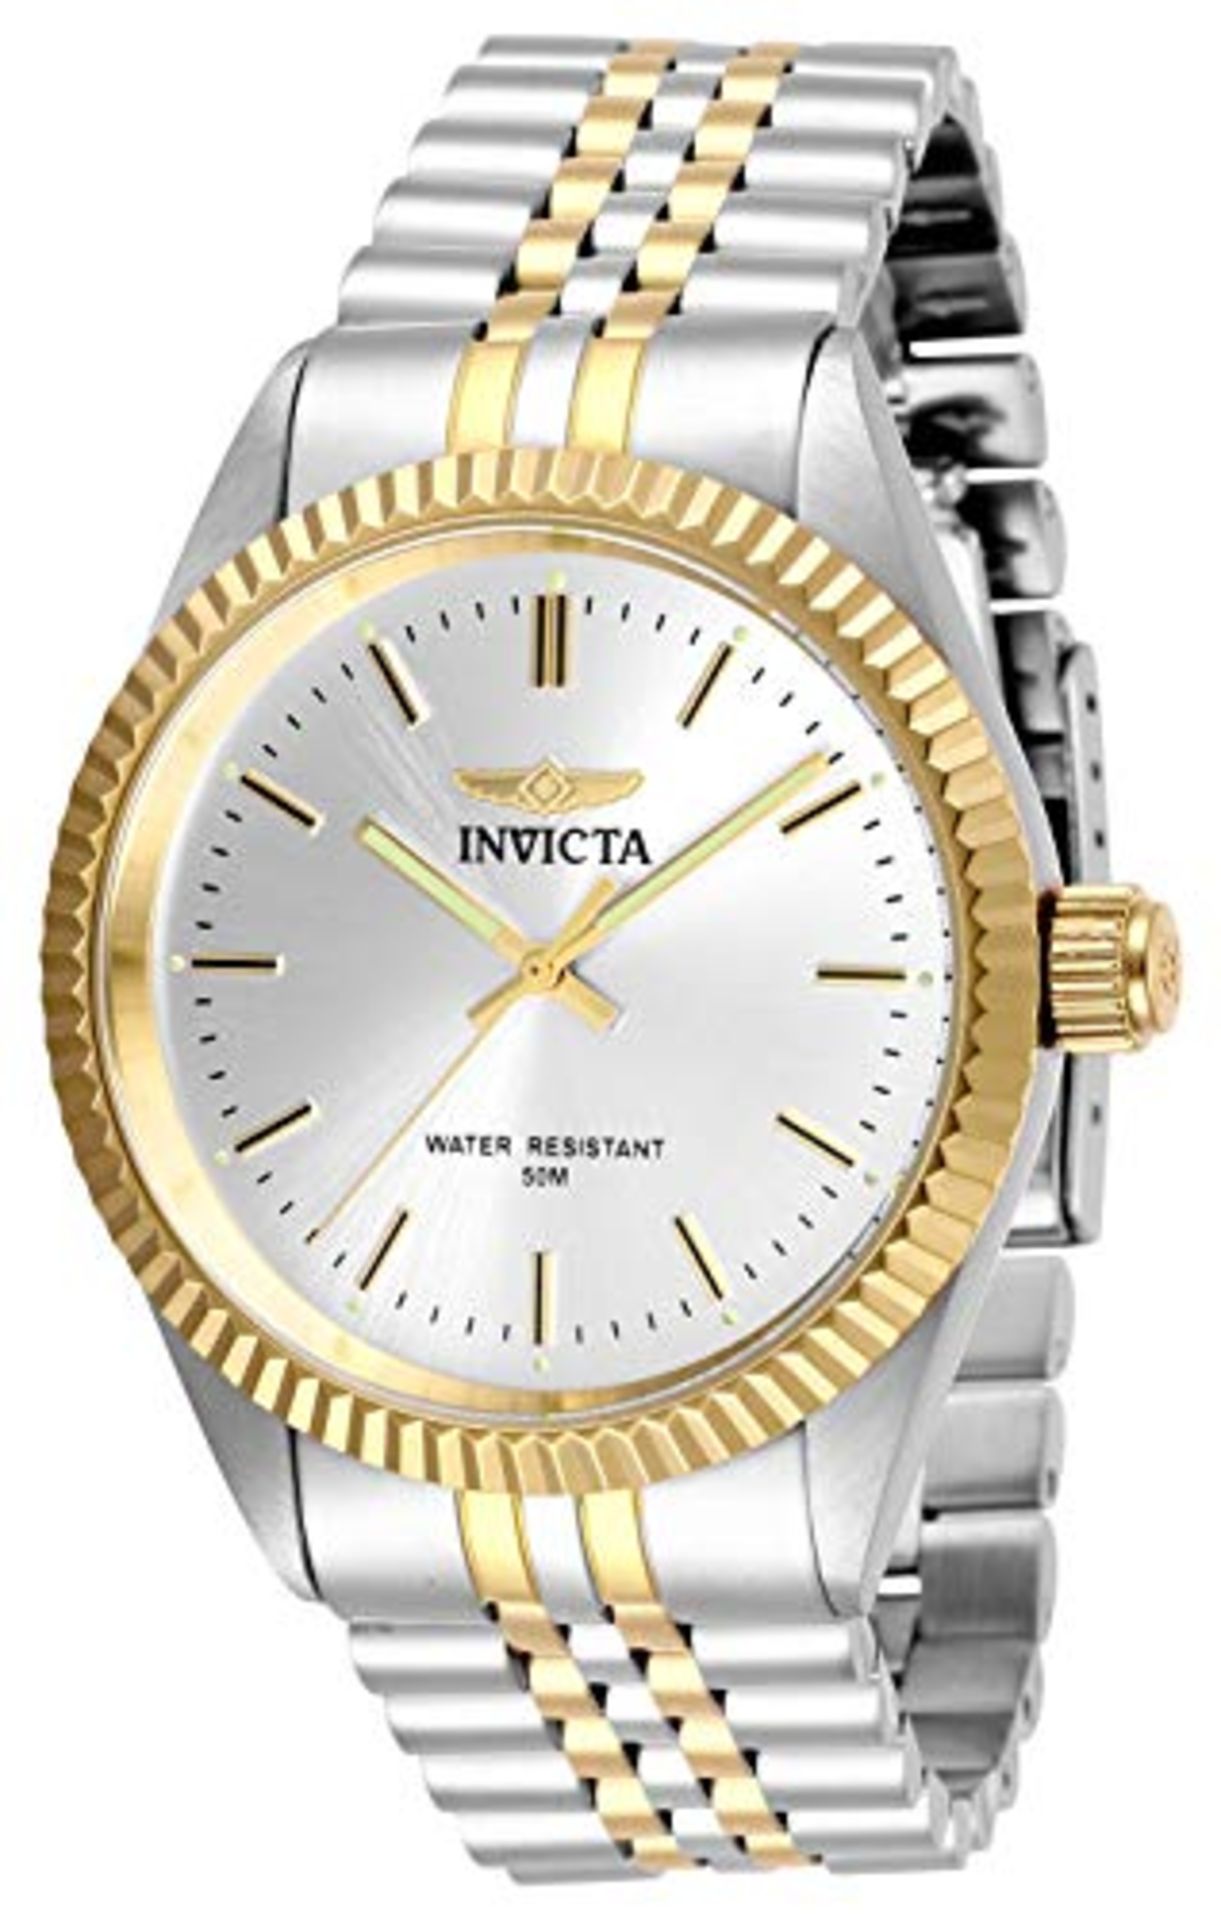 RRP £89.00 Invicta Specialty - Men's Stainless Steel Watch with Quartz Movement, Two-Tone/Silver